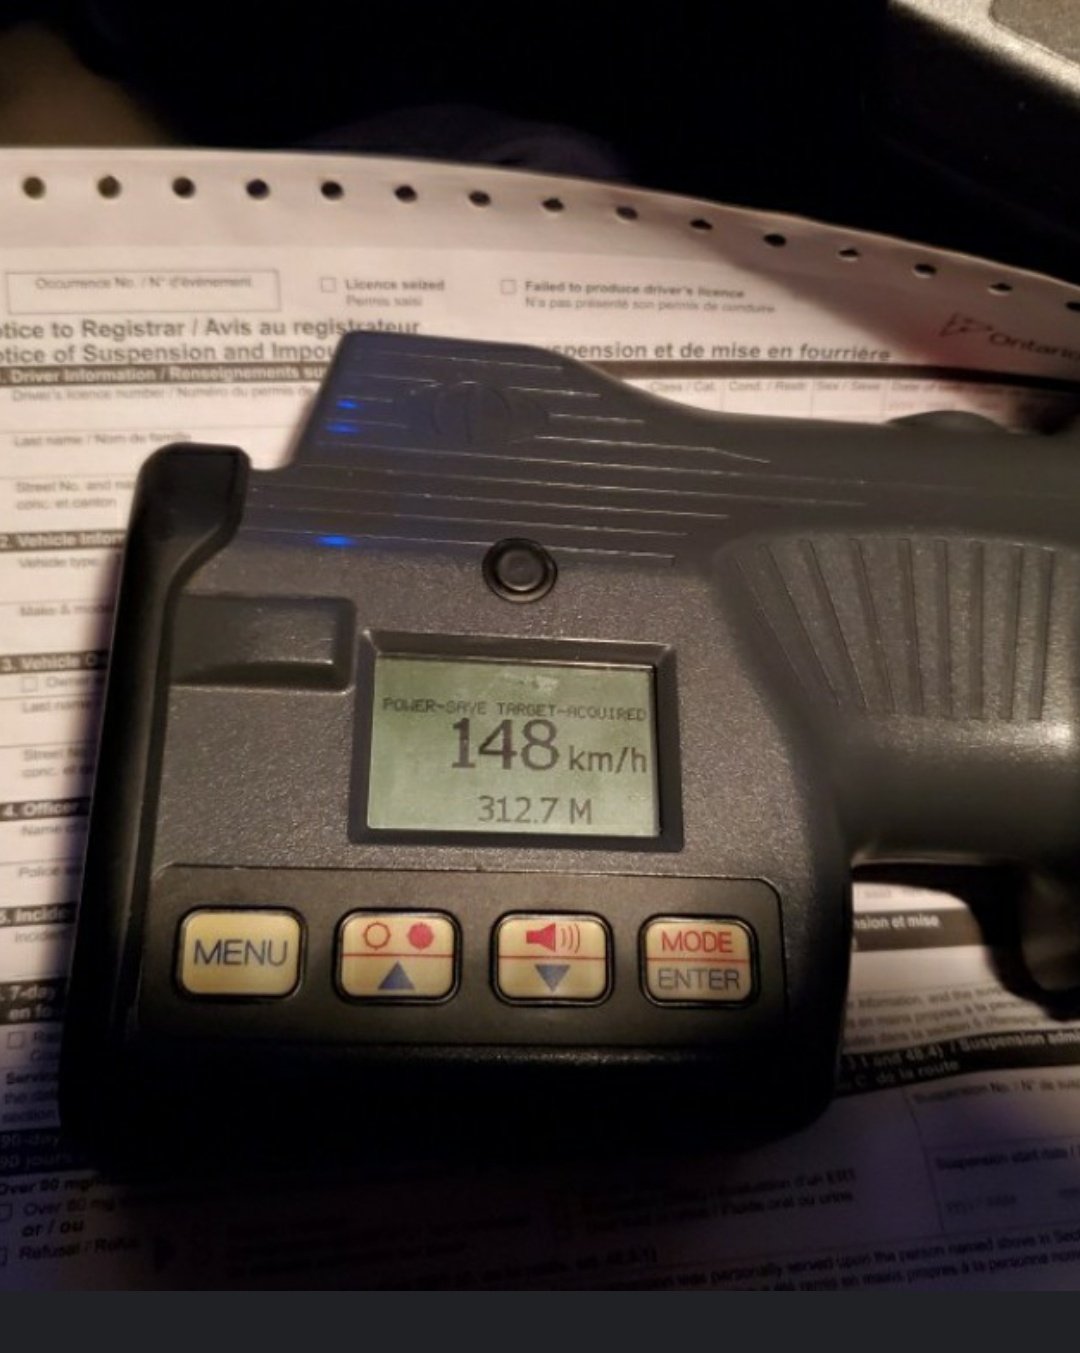 Peterborough police clocked a driver at 148 km/h in a posted 60 km/h zone on Friday.